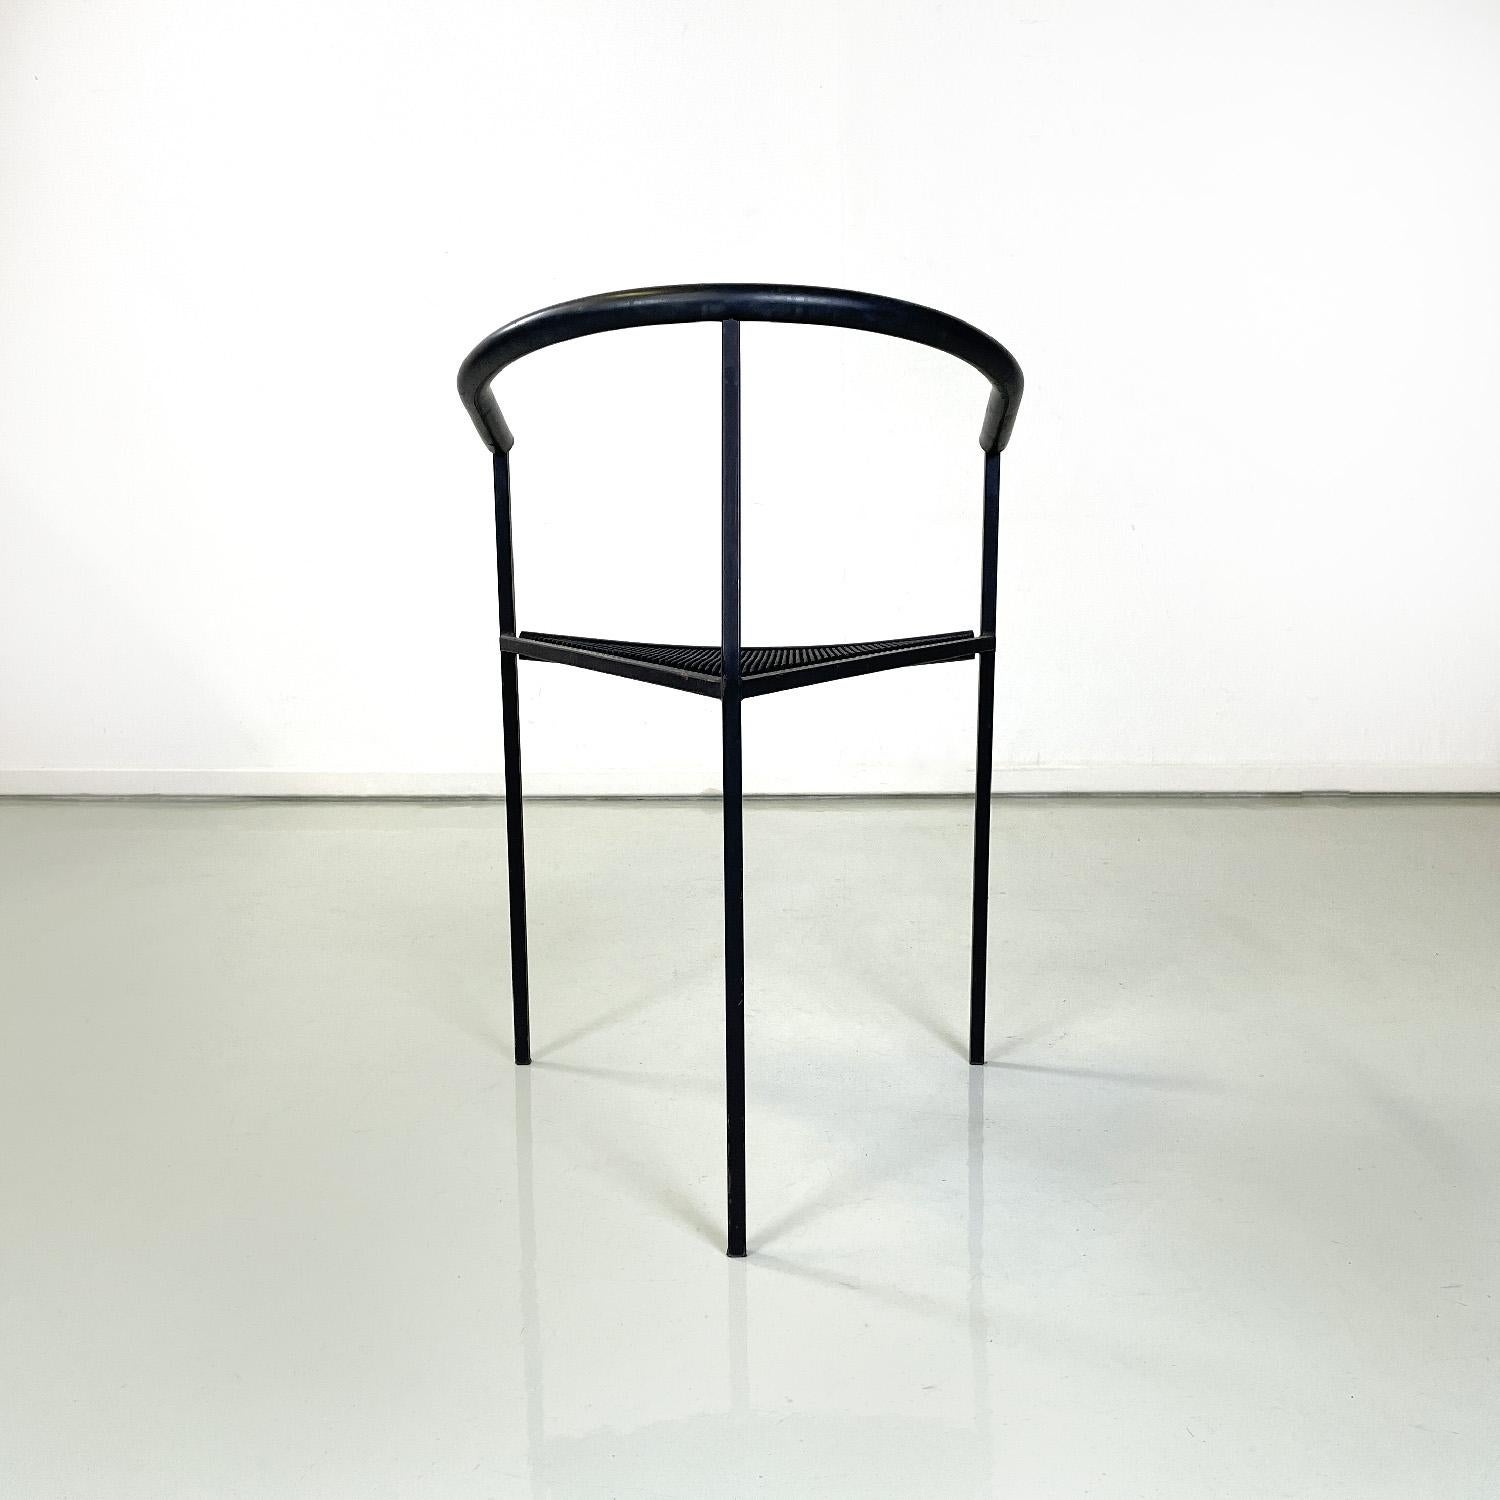 Late 20th Century Italian modern black metal chair by Peregalli and Calatroni for Zeus, 1990s